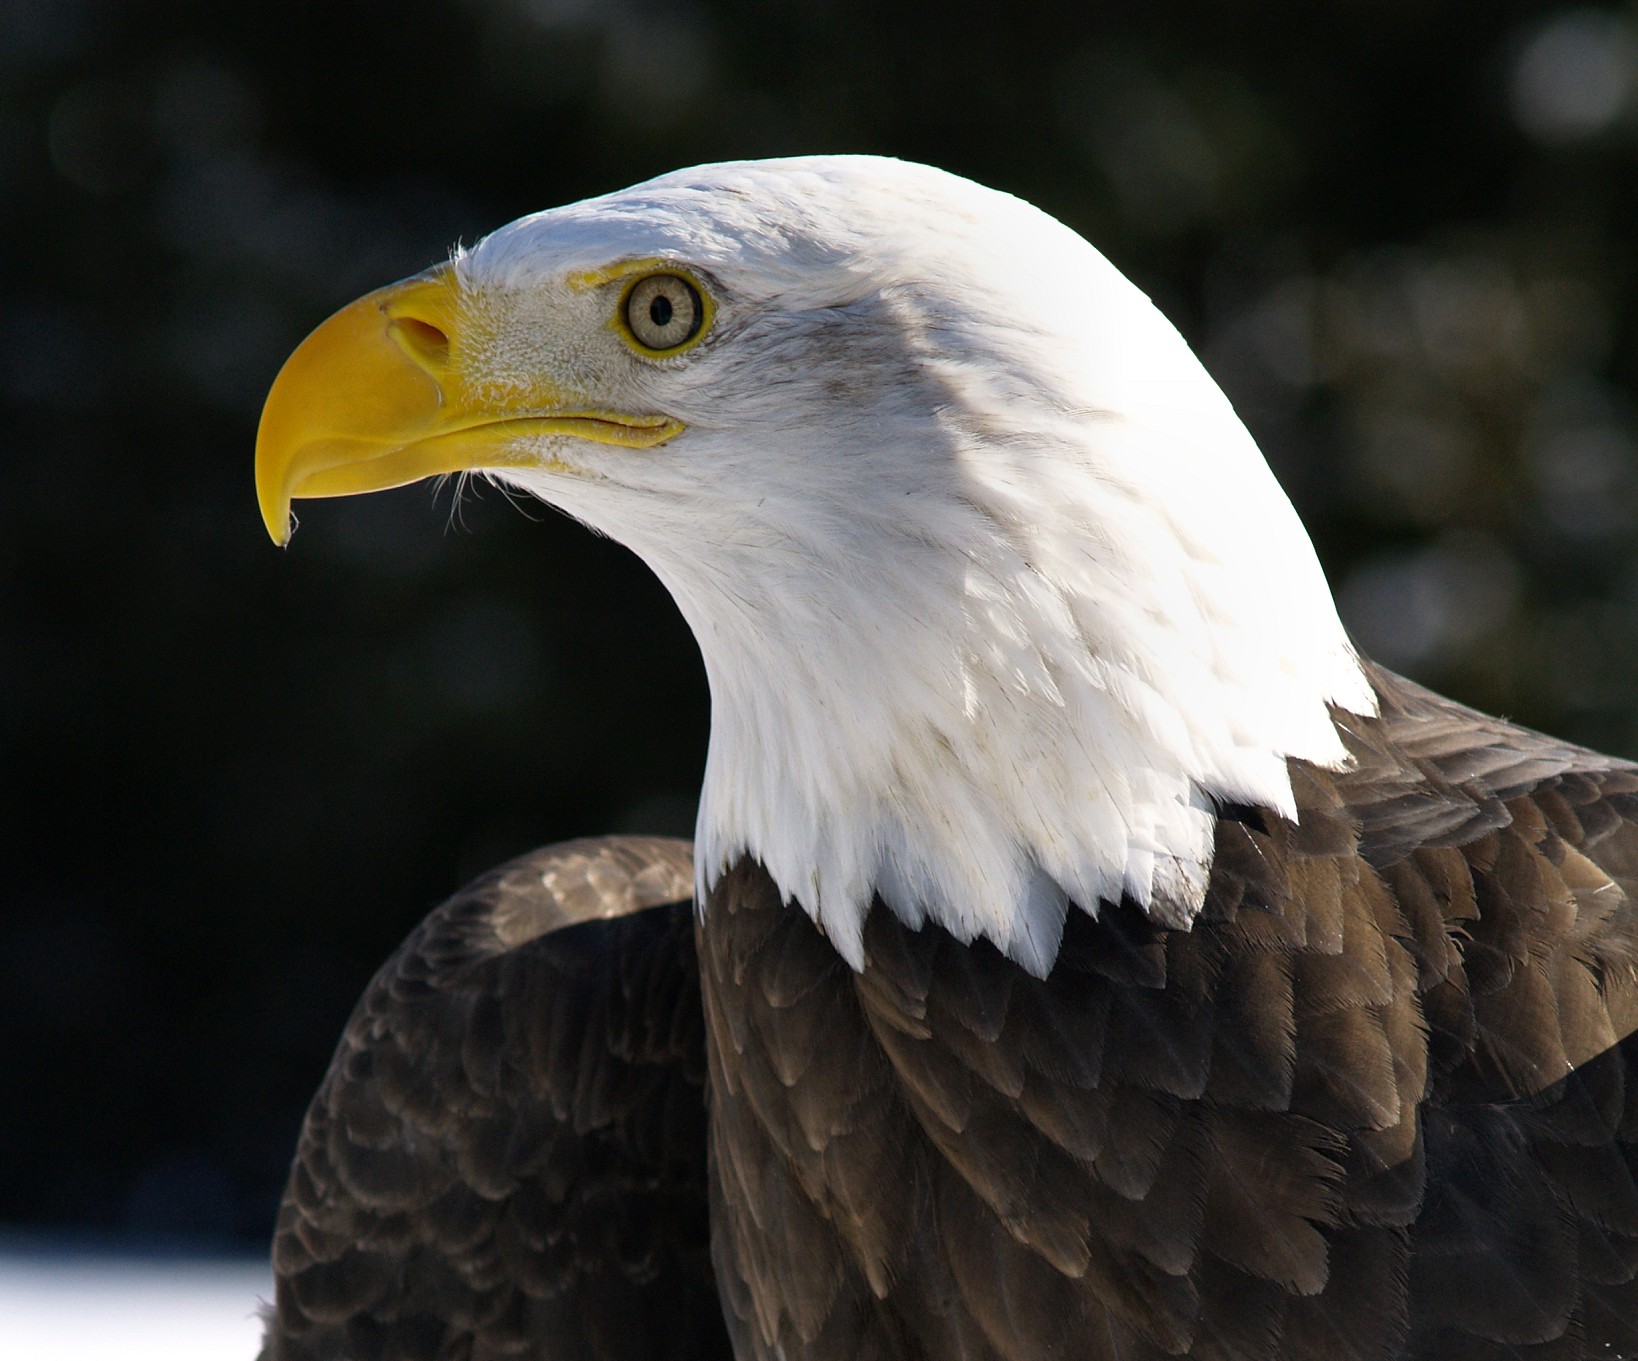 American Eagle Day – A Special Day for a Special Bird